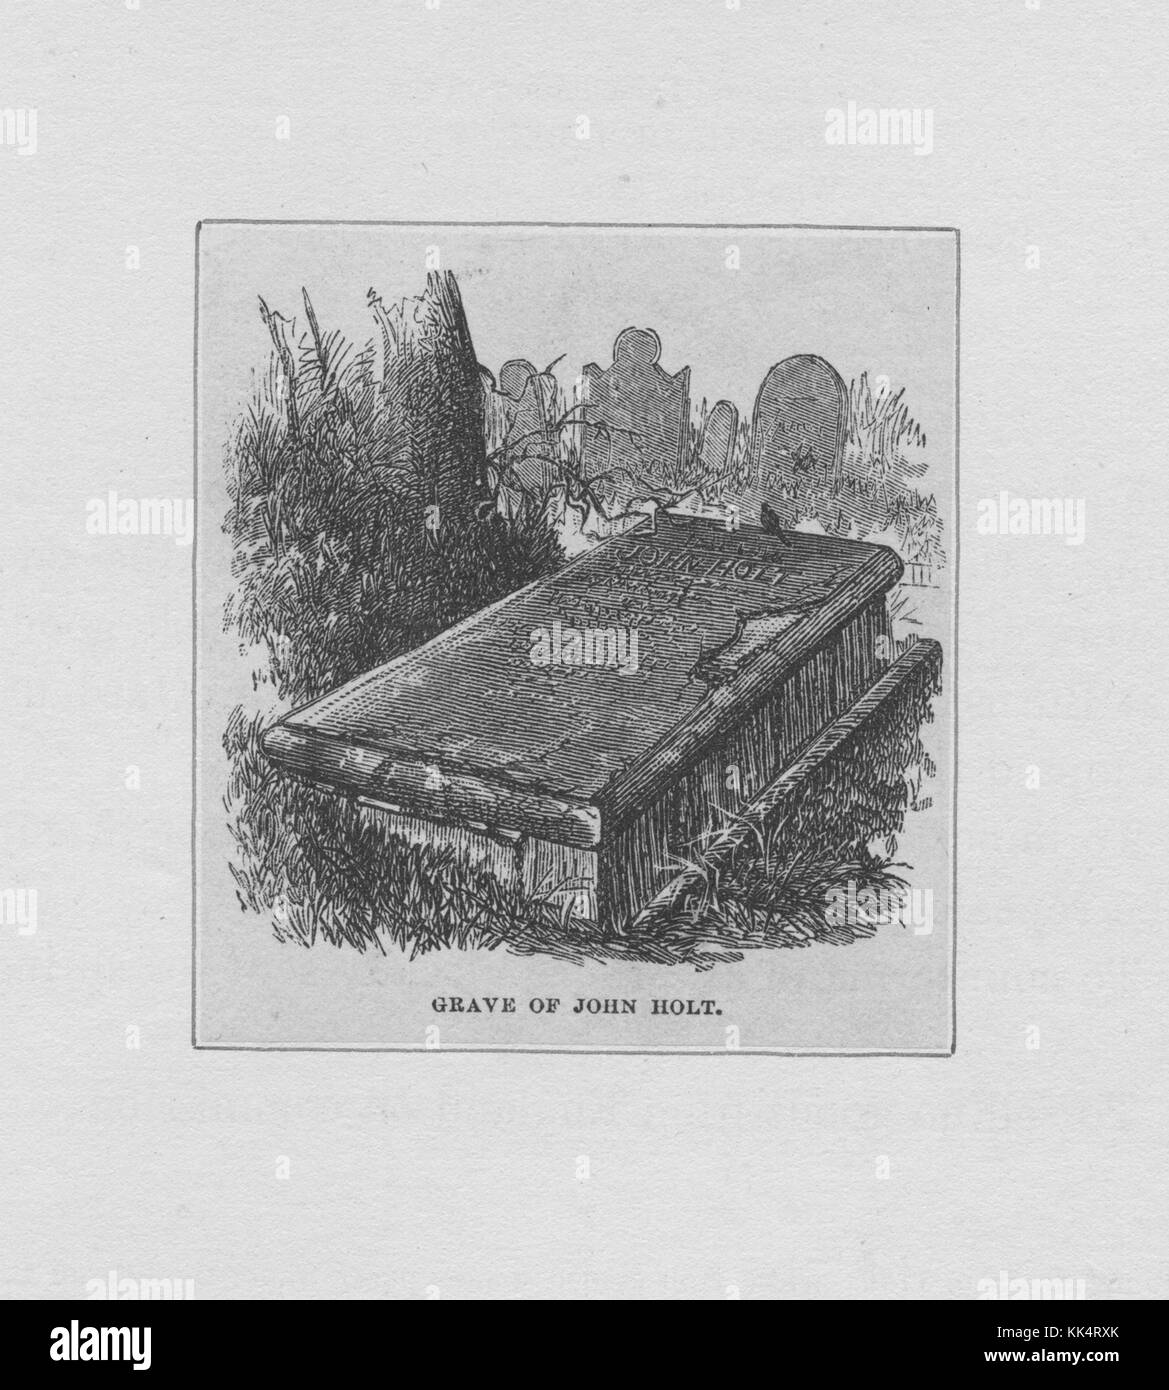 Engraving depicting a view of the cemetery, titled 'Grave of John Holt', Holt was a colonial American newspaper publisher, printer, postmaster, and mayor of Williamsburg, Virginia, 1830. From the New York Public Library. Stock Photo